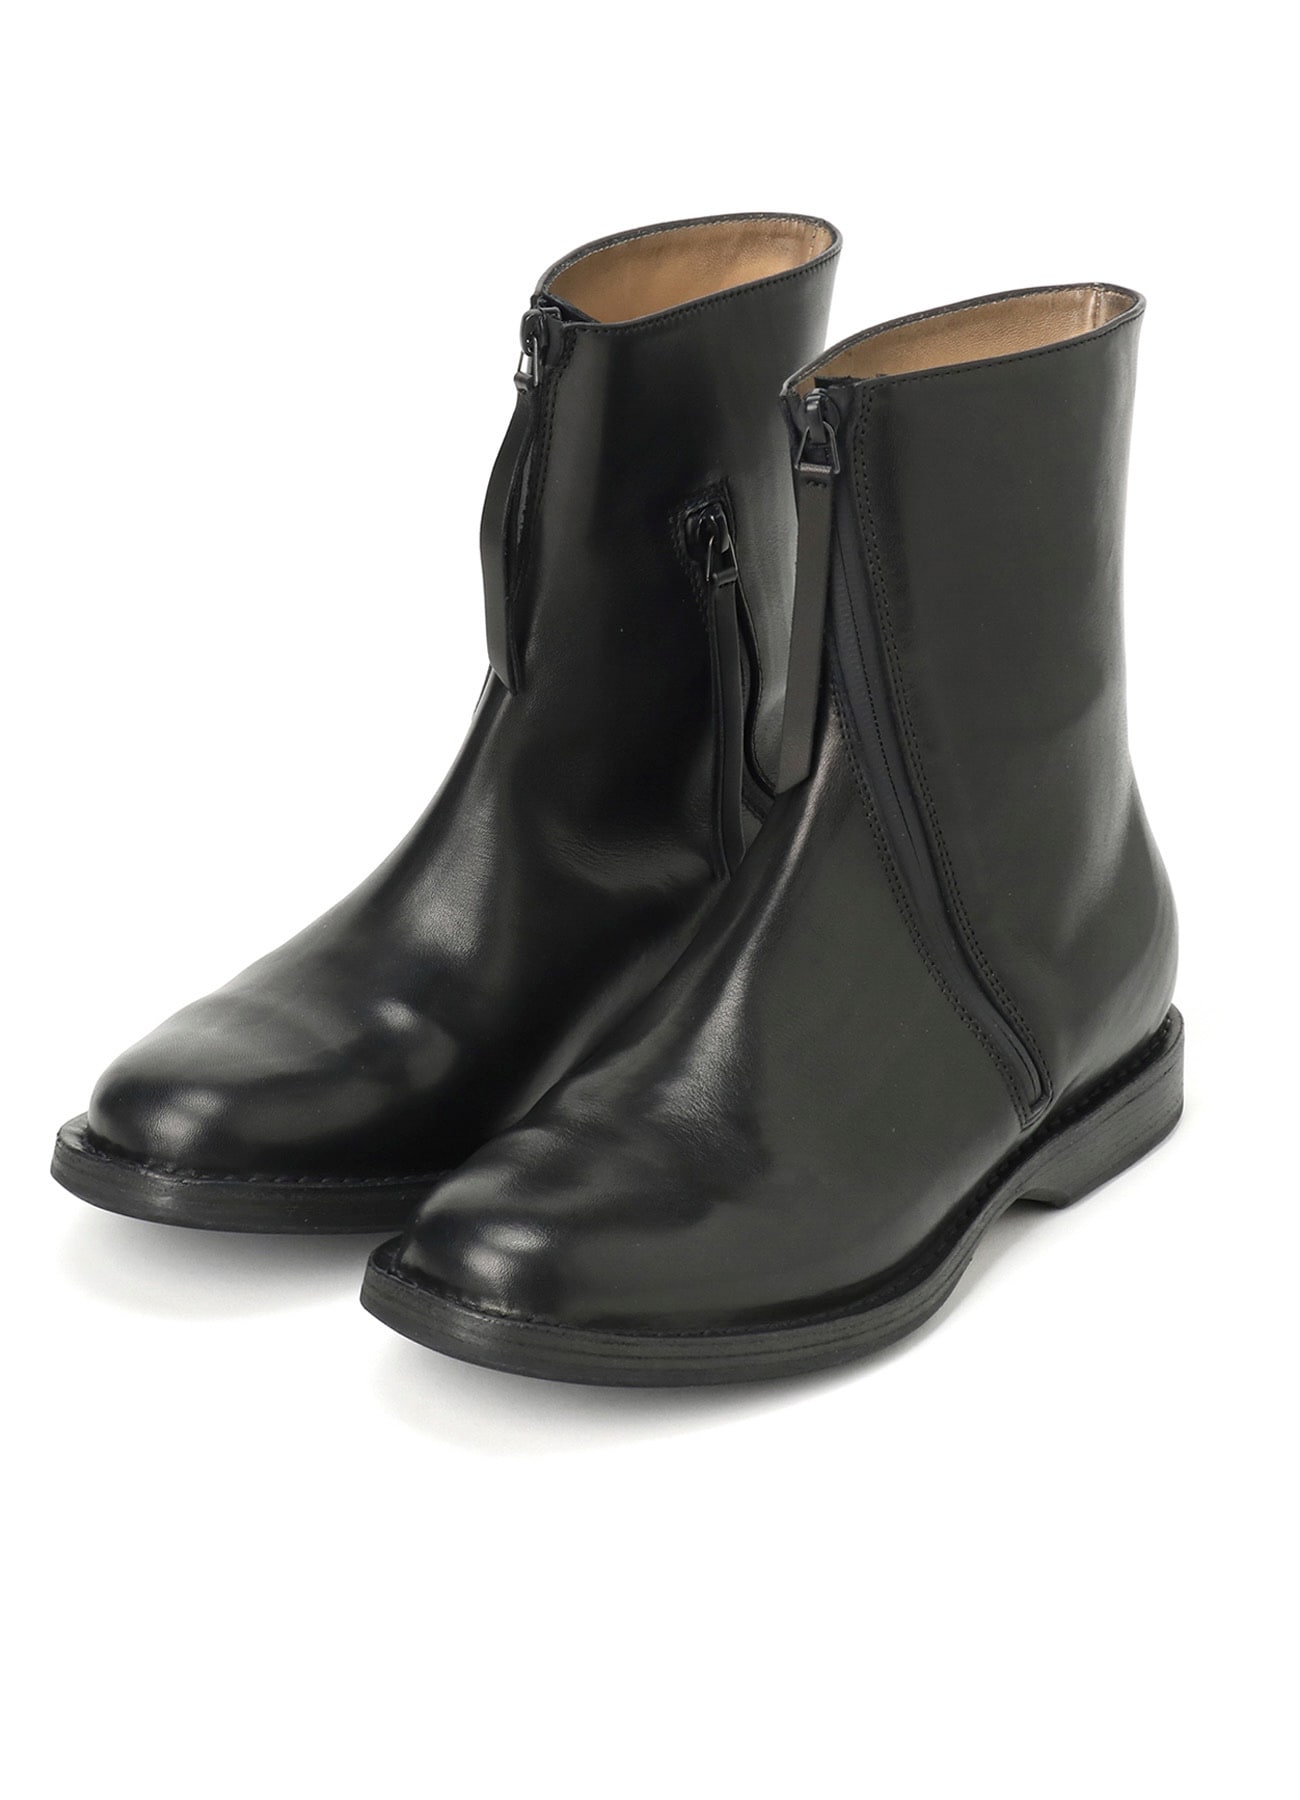 WAXED CALF LEATHER CURVED ZIPPER BOOTS